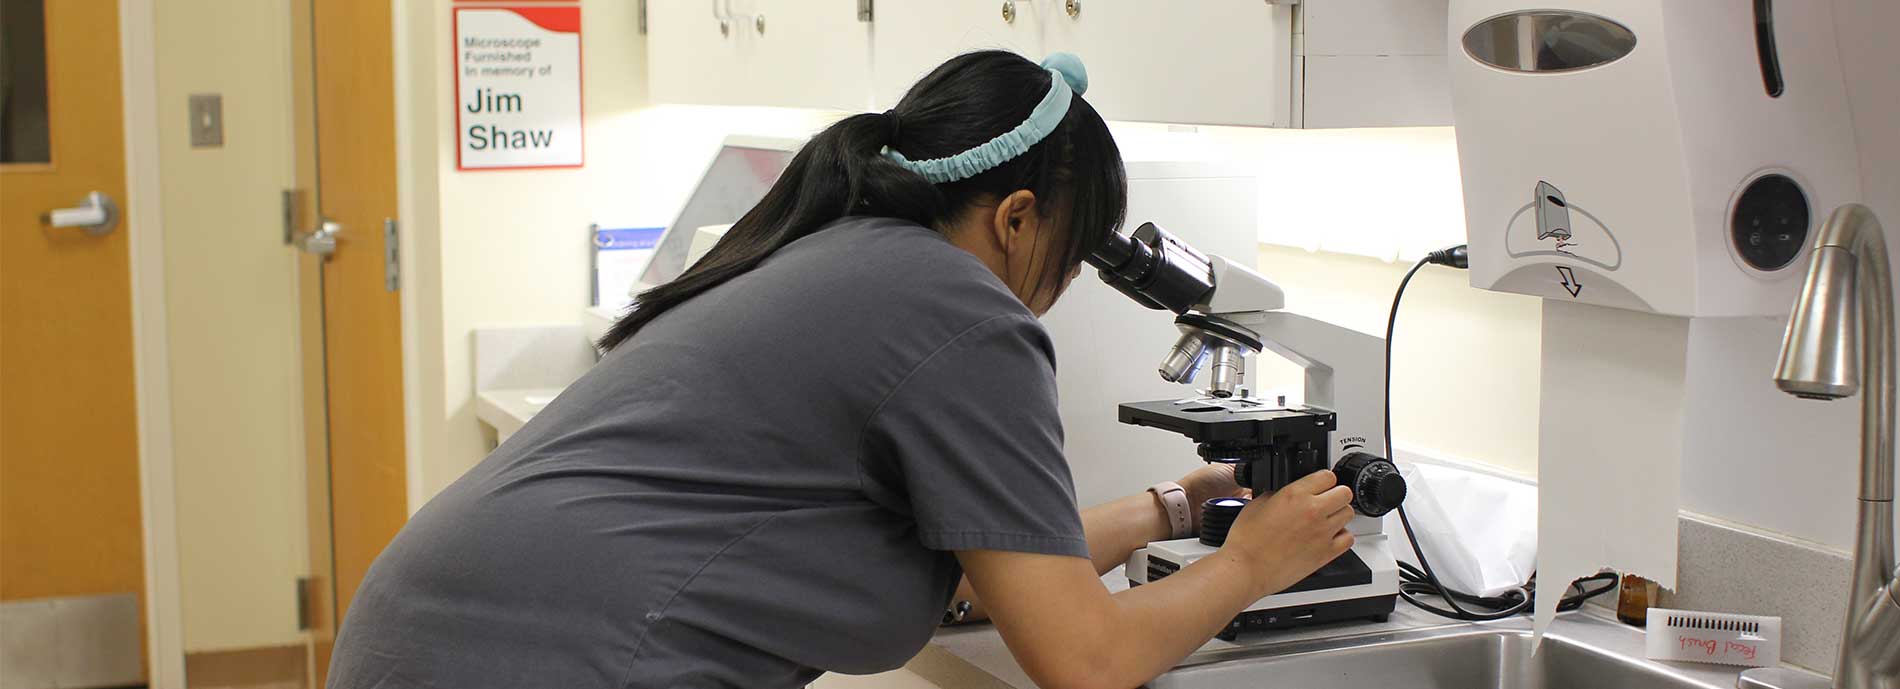 Veterinary Assistant at the Veterinary Center looks at Microscope